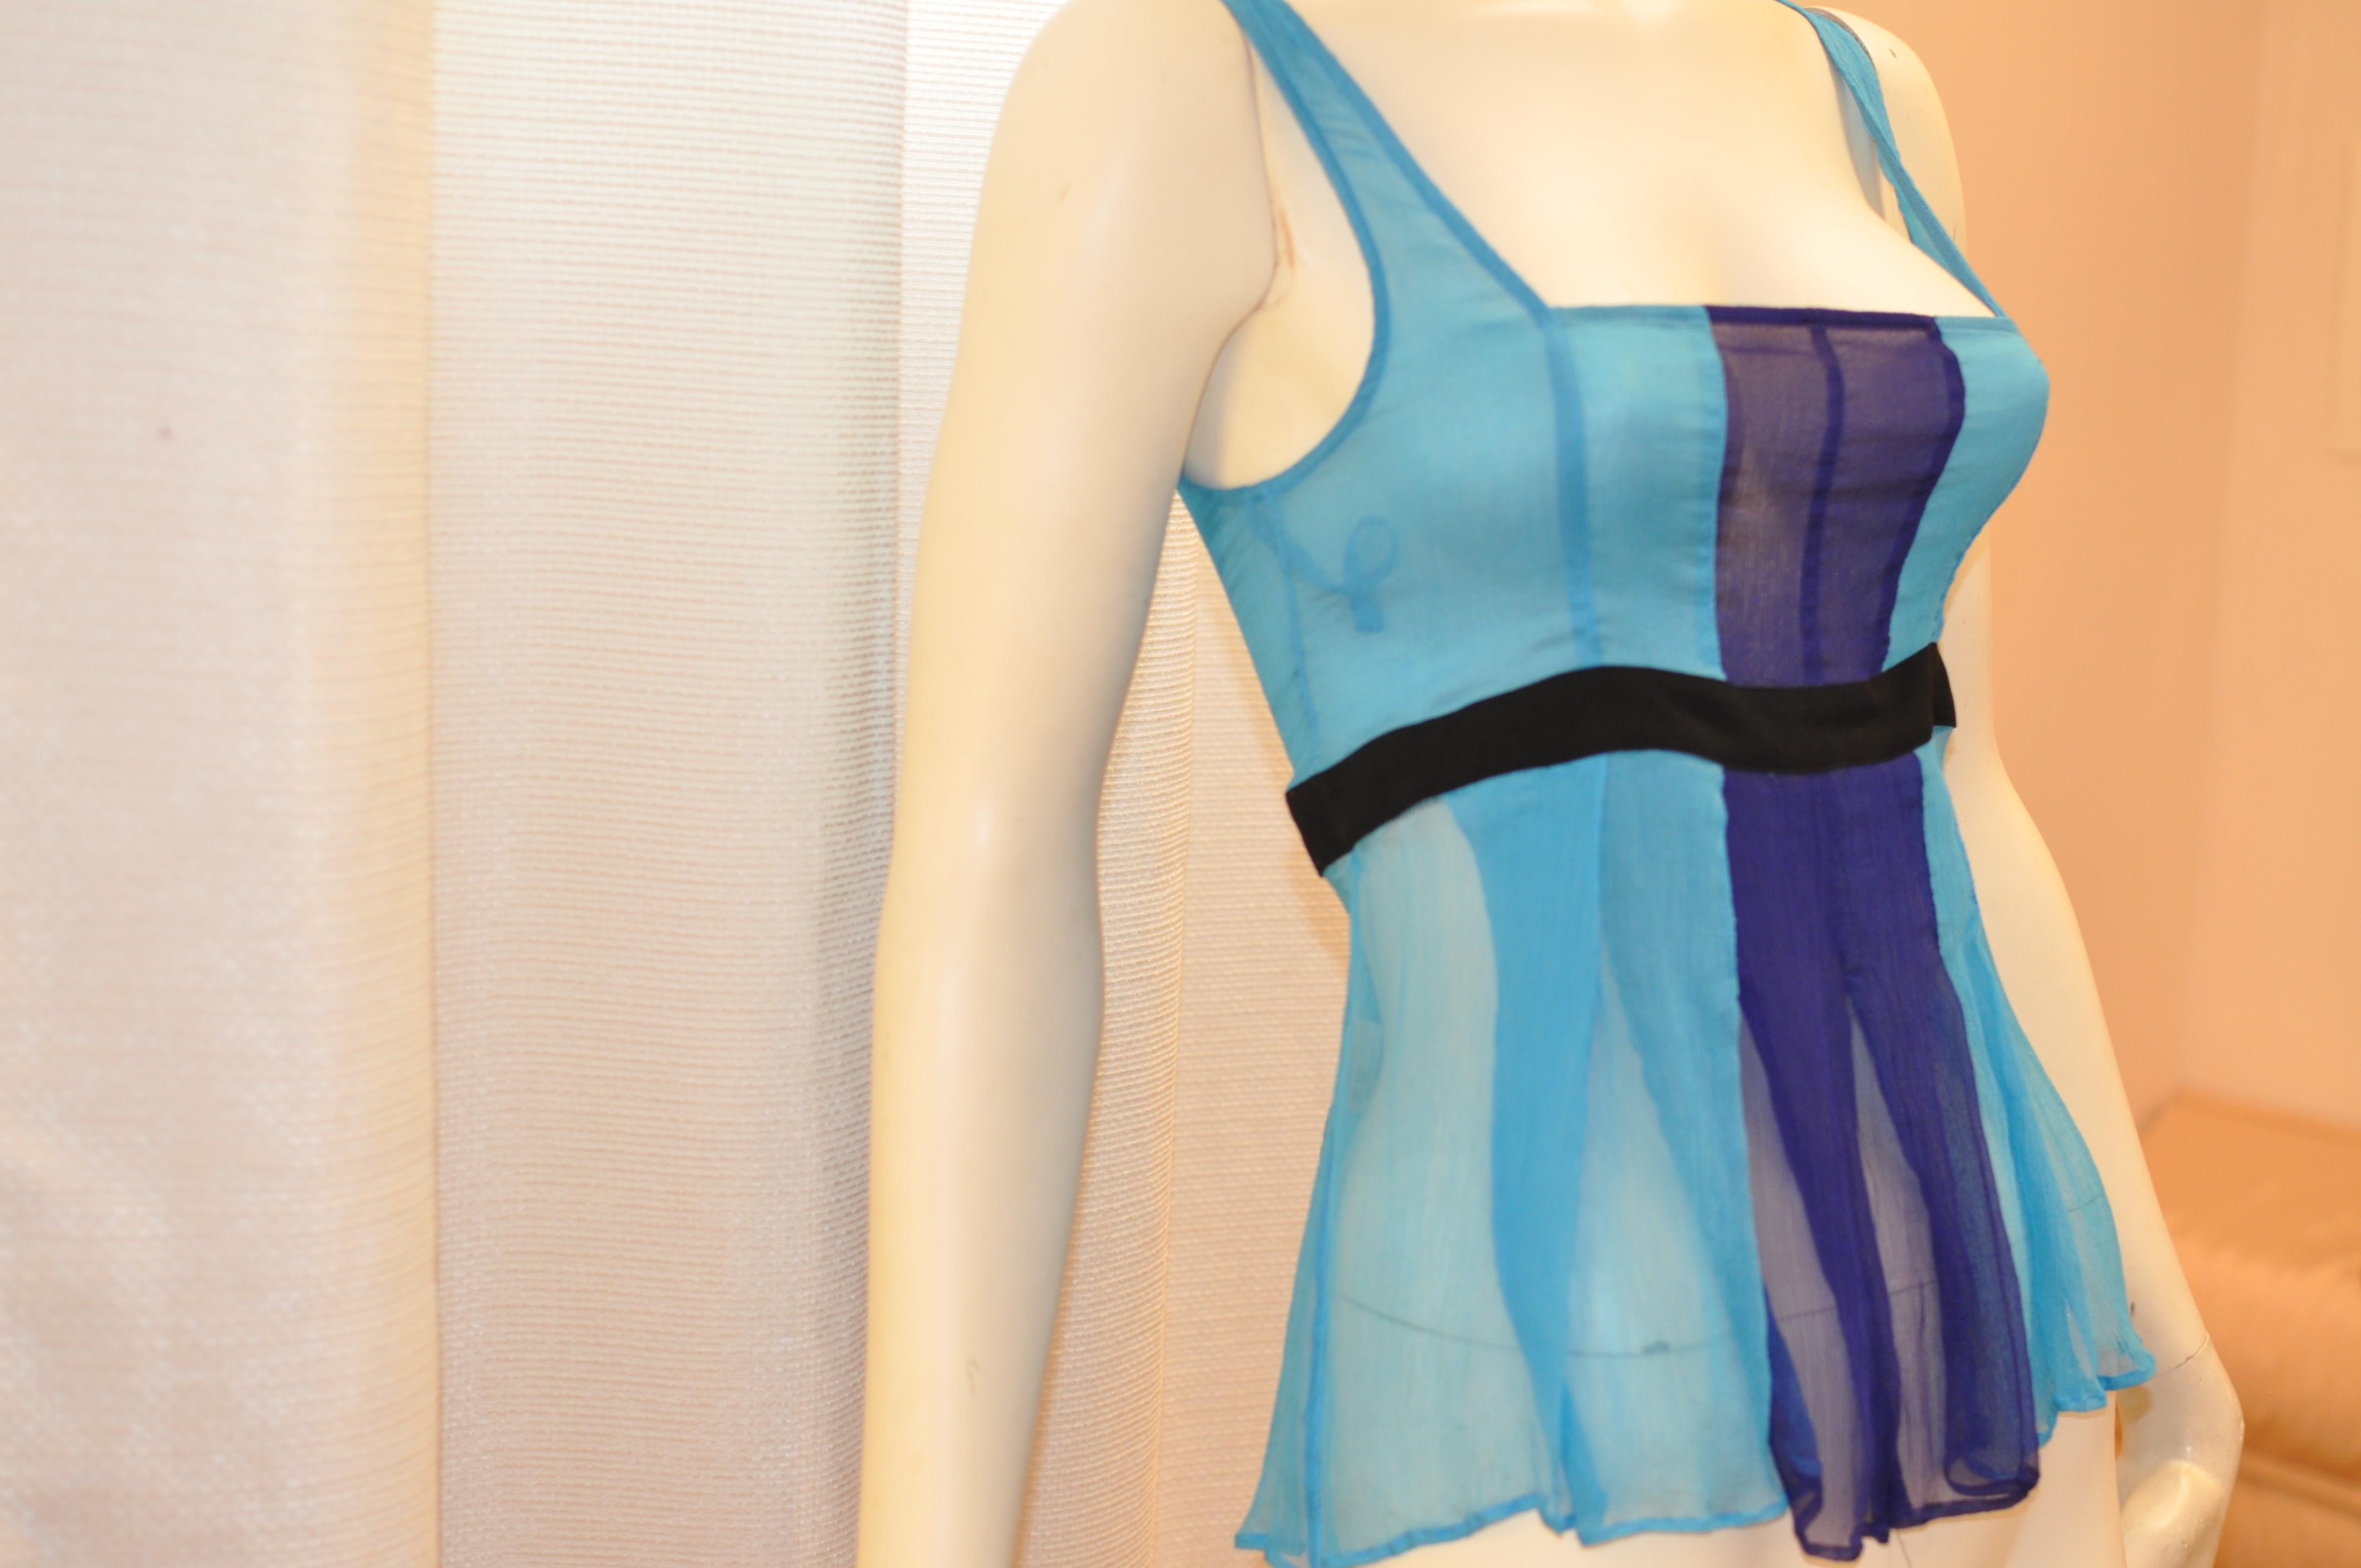 Perfect little top for the warm seasons! This silk top has a mainly aqua blue background with a royal blue panel in the center front and a black band at below the bust.

The neckline is square, and the below the waist pleating hangs nicely.